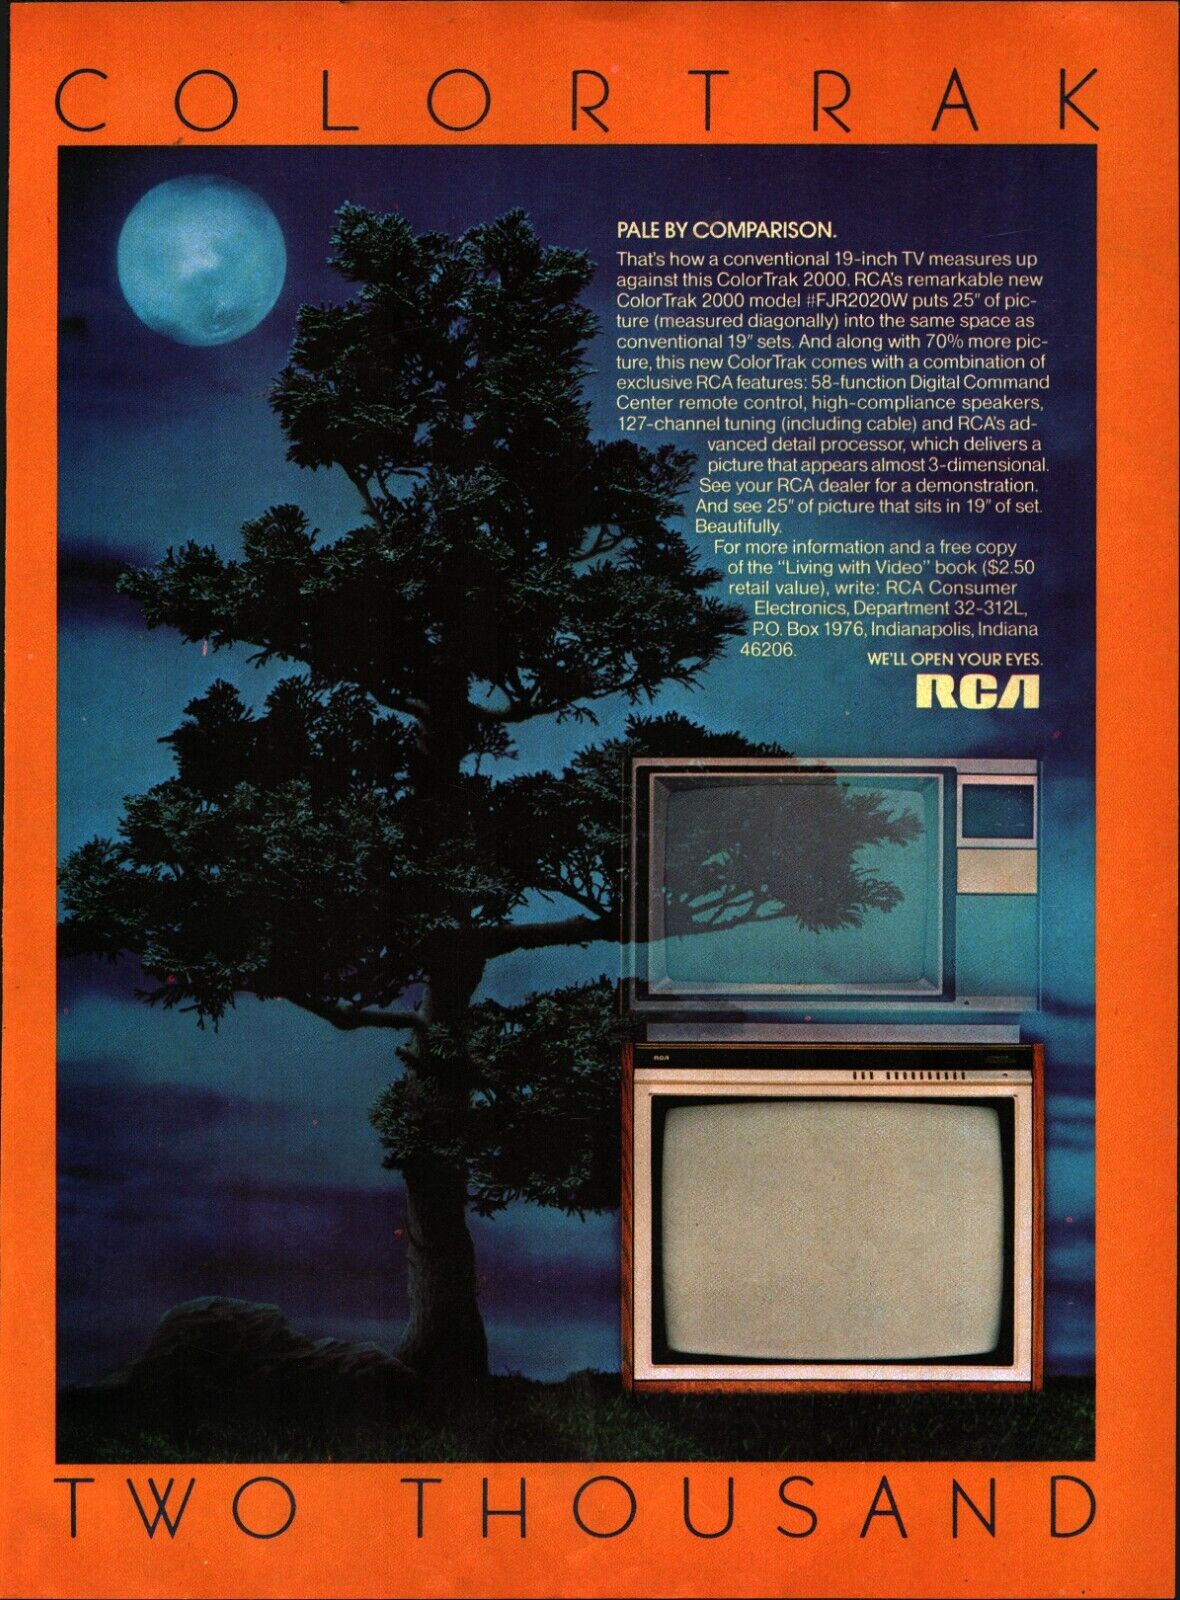 RCA Colortrak Television Print Ad 1983 8x11 Vintage Great To Frame F3